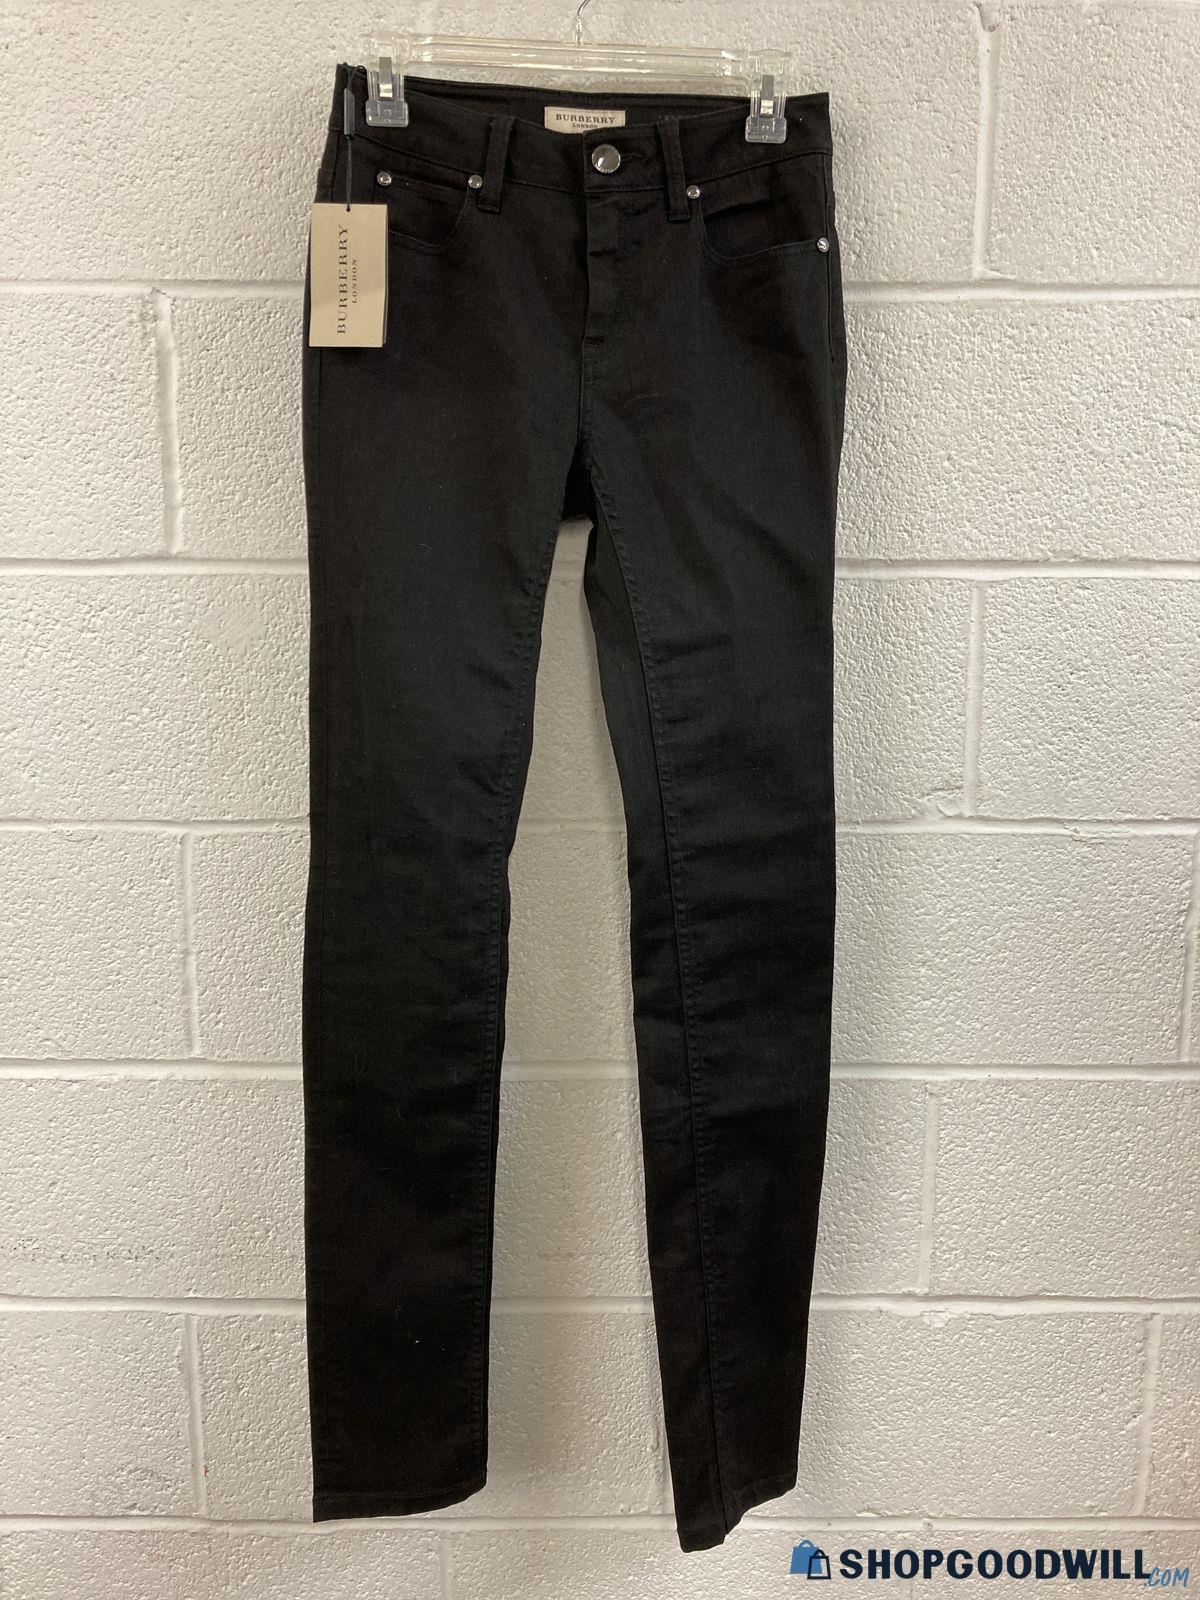 New with Tags - Burberry Black Thurleston Skinny Denim Jeans - Size 28R ...